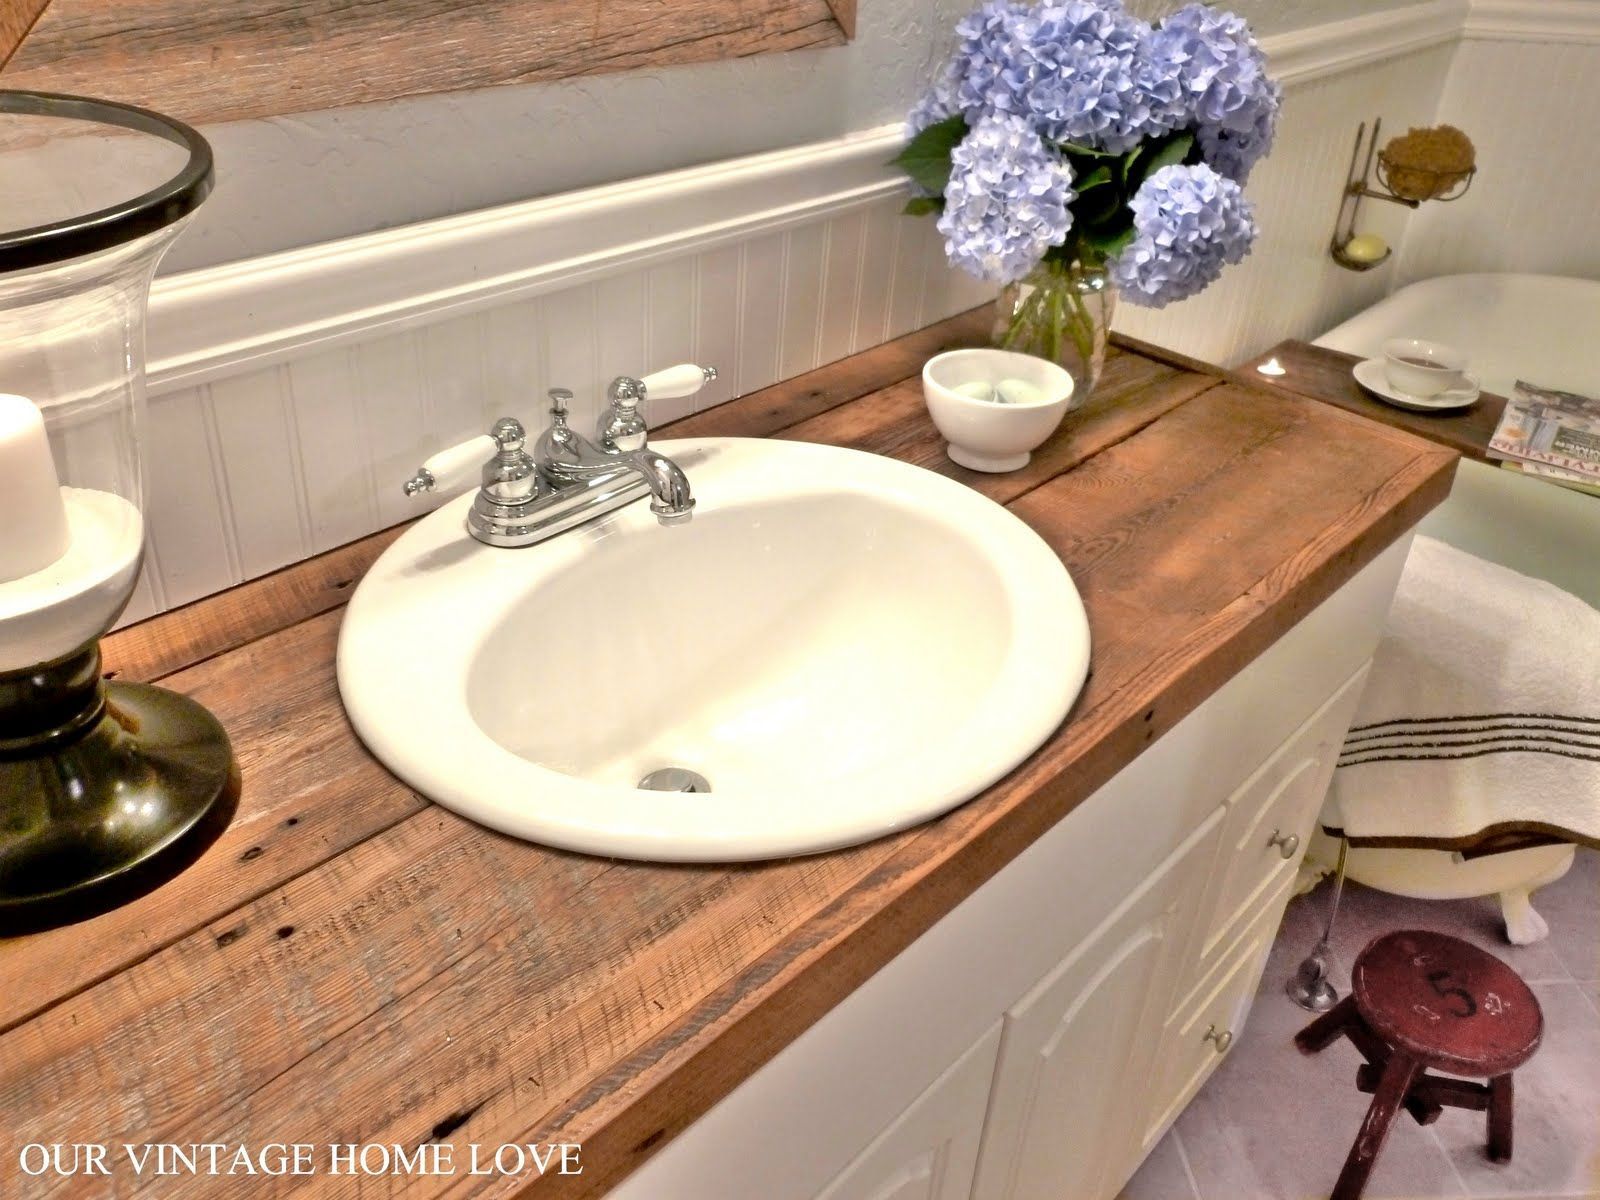 Hate your countertops?  DIY salvaged wood counter…cheap and so much more awesome than tile (for me at least) ;)